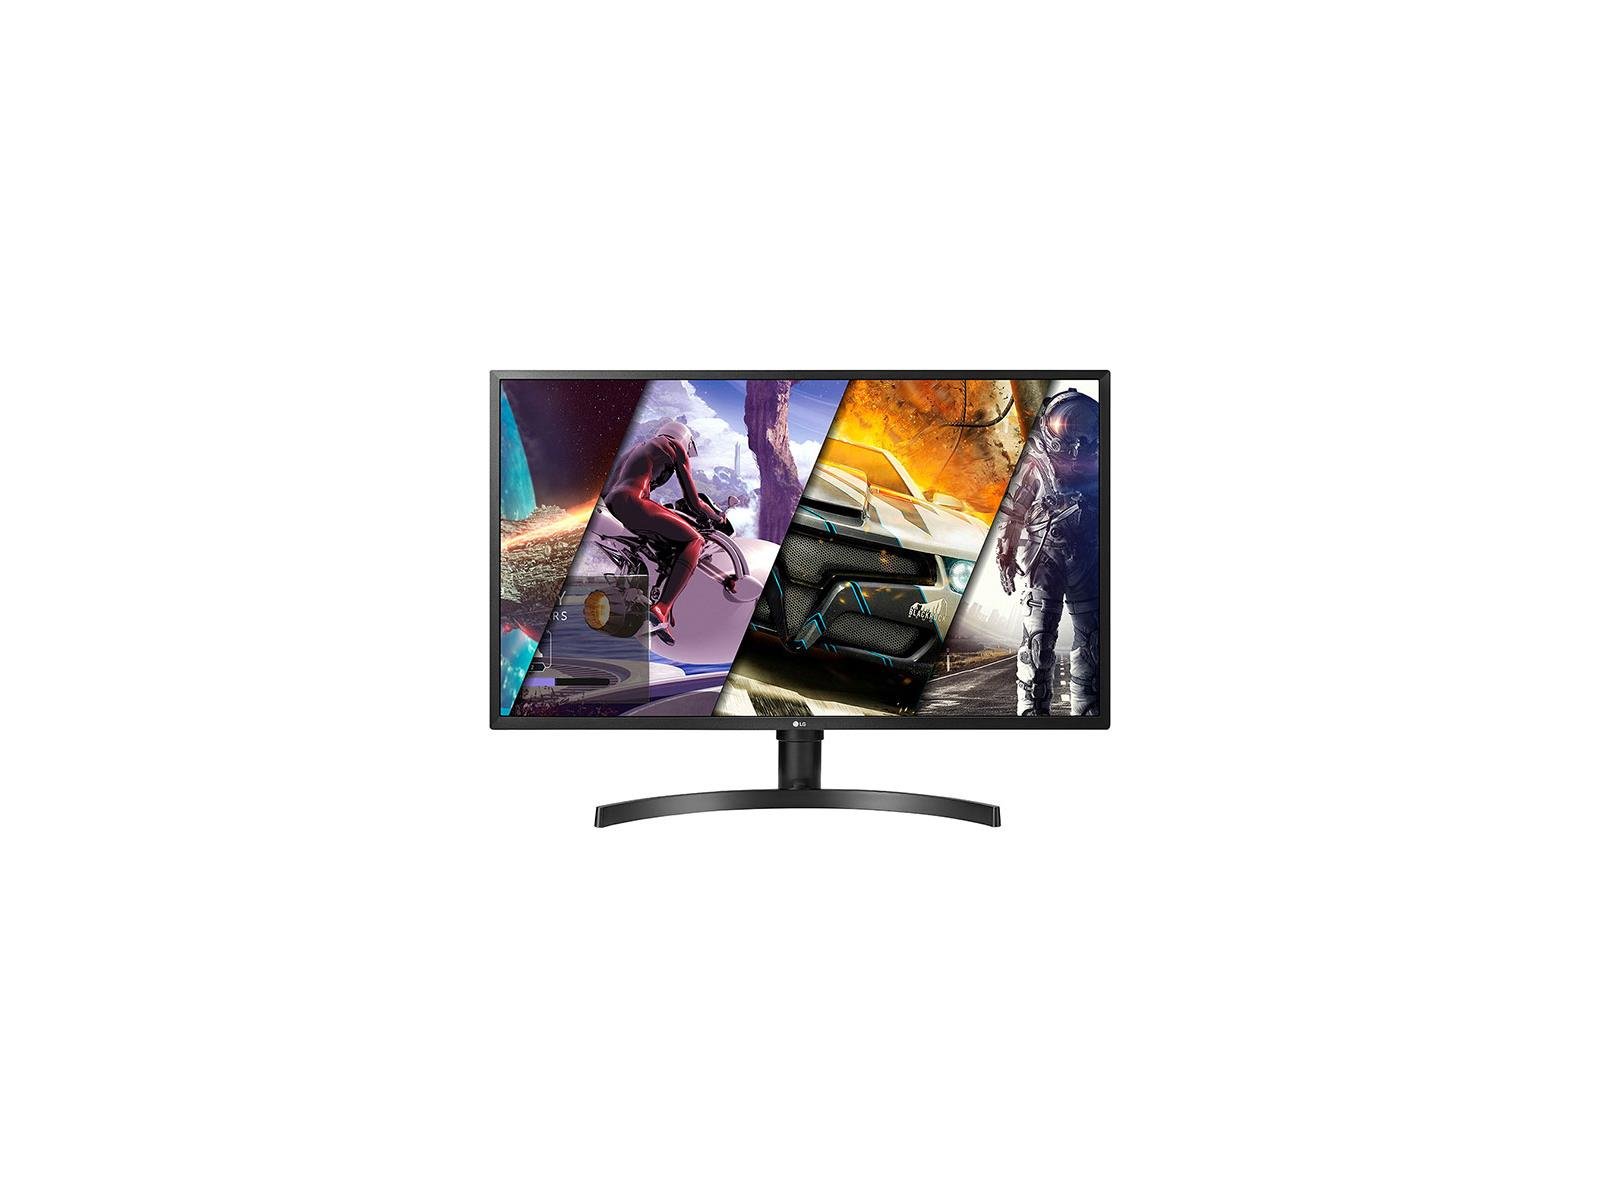 LG 32UK550-B 32-Inch AMD FreeSync Gaming Monitor Delivers 4K HDR